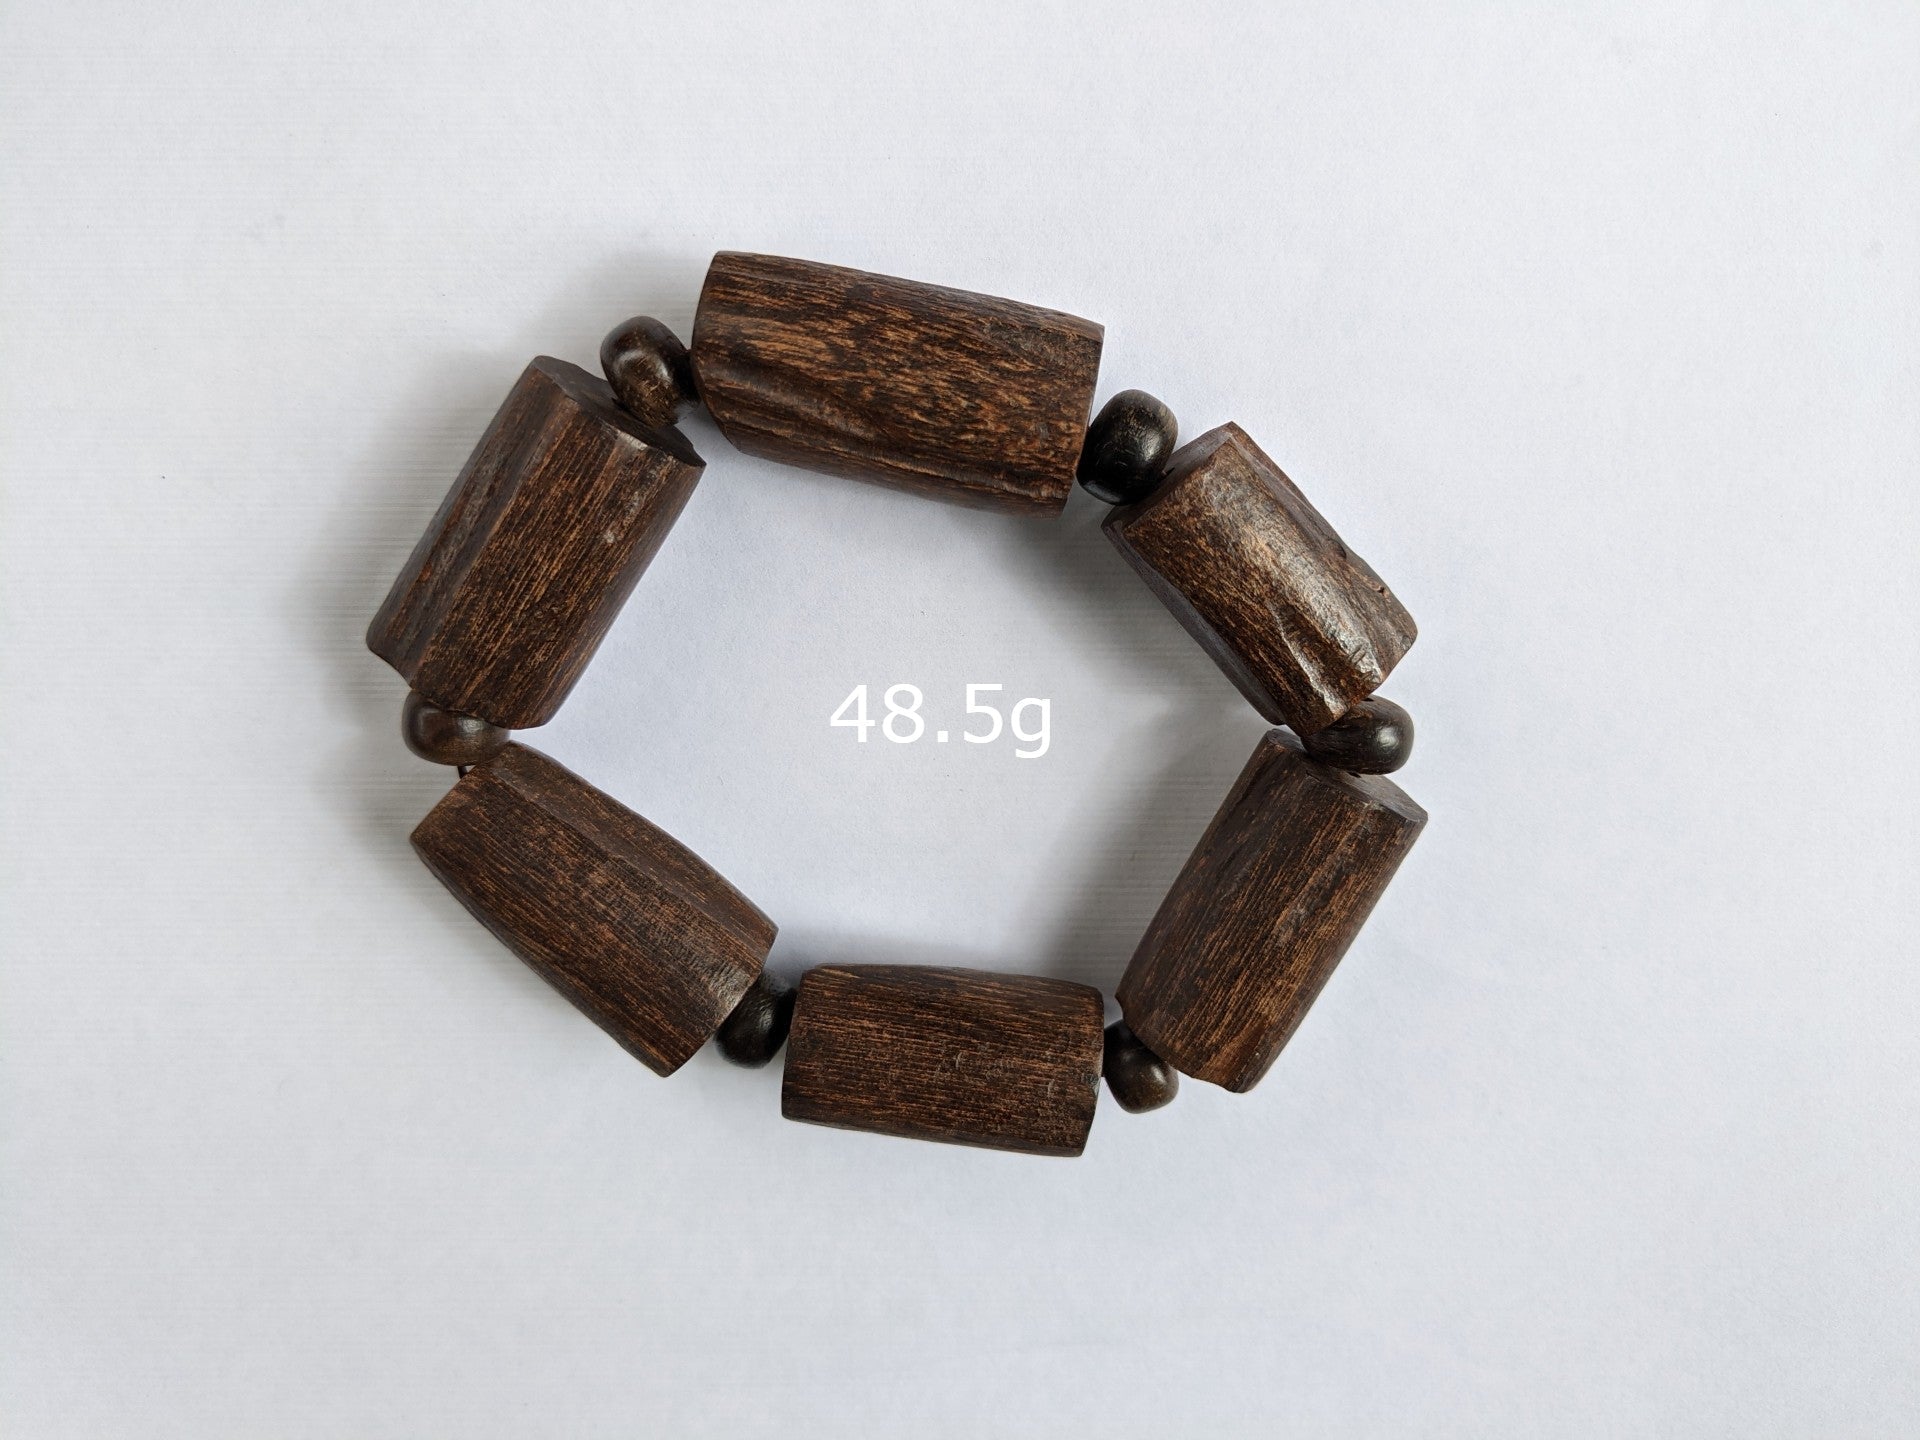 Style of the nature: Raw Wild Sinking Agarwood Bracelet made from small tree branches - 48.5